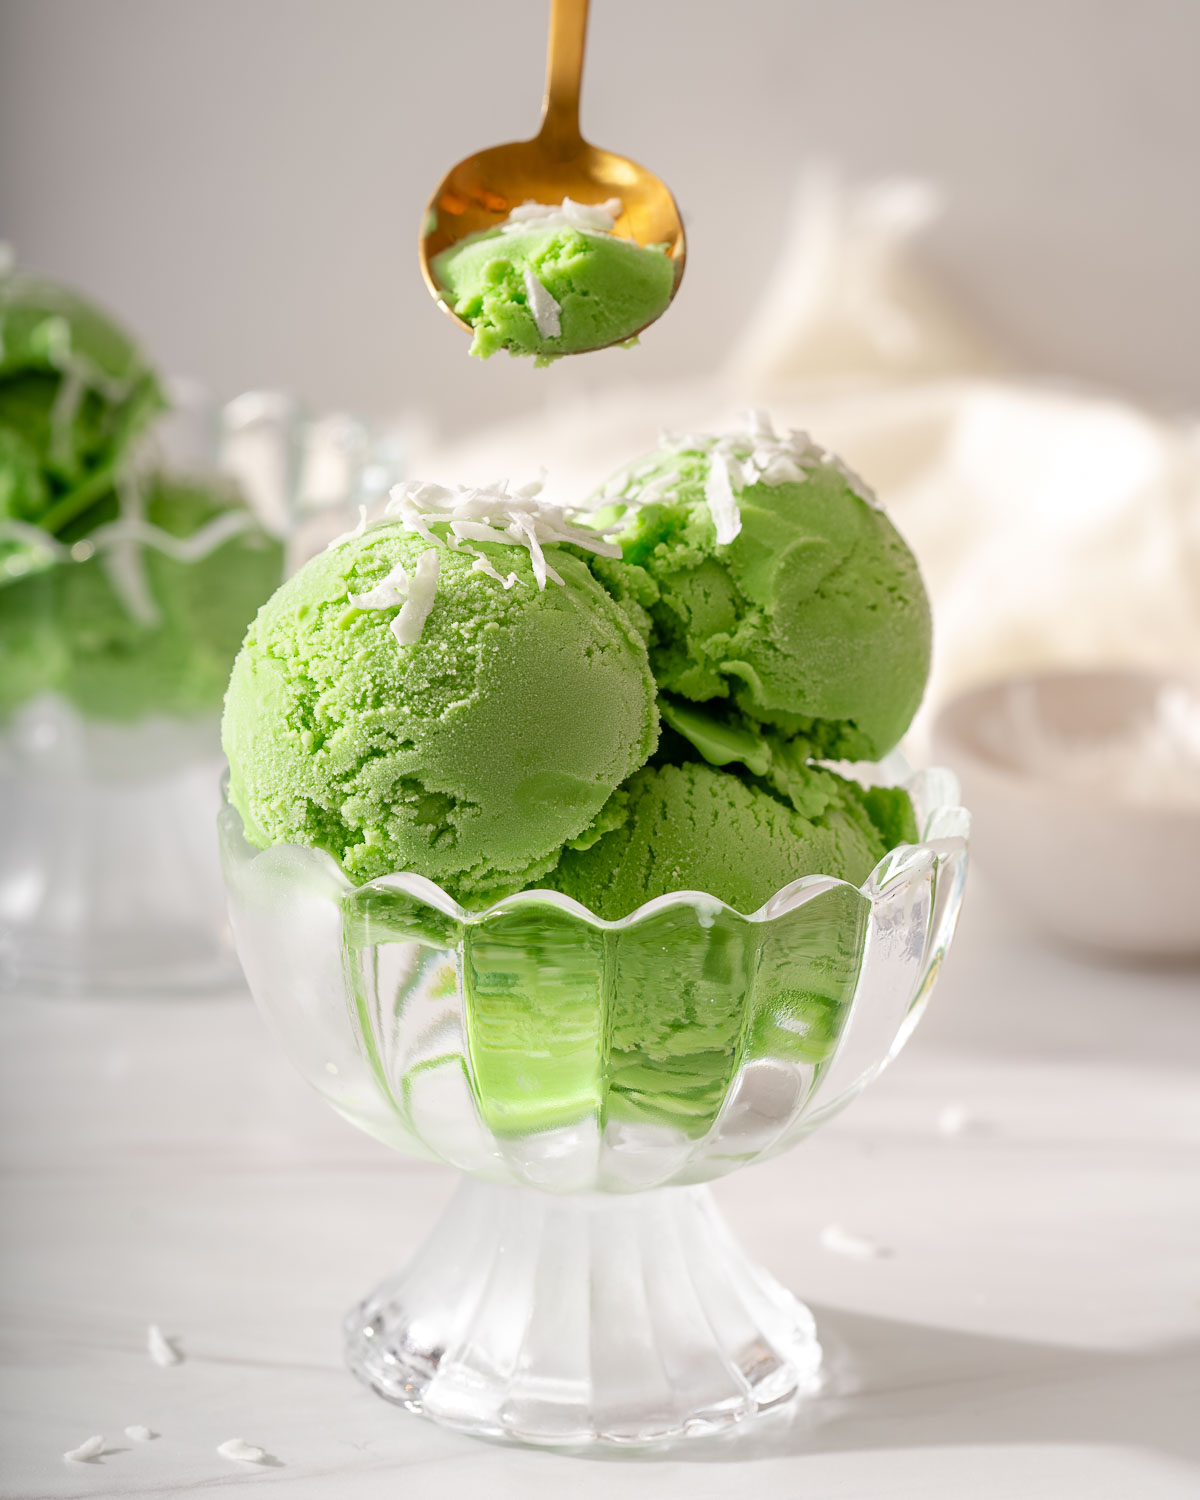 Scooping pandan ice cream from a small serving bowl.